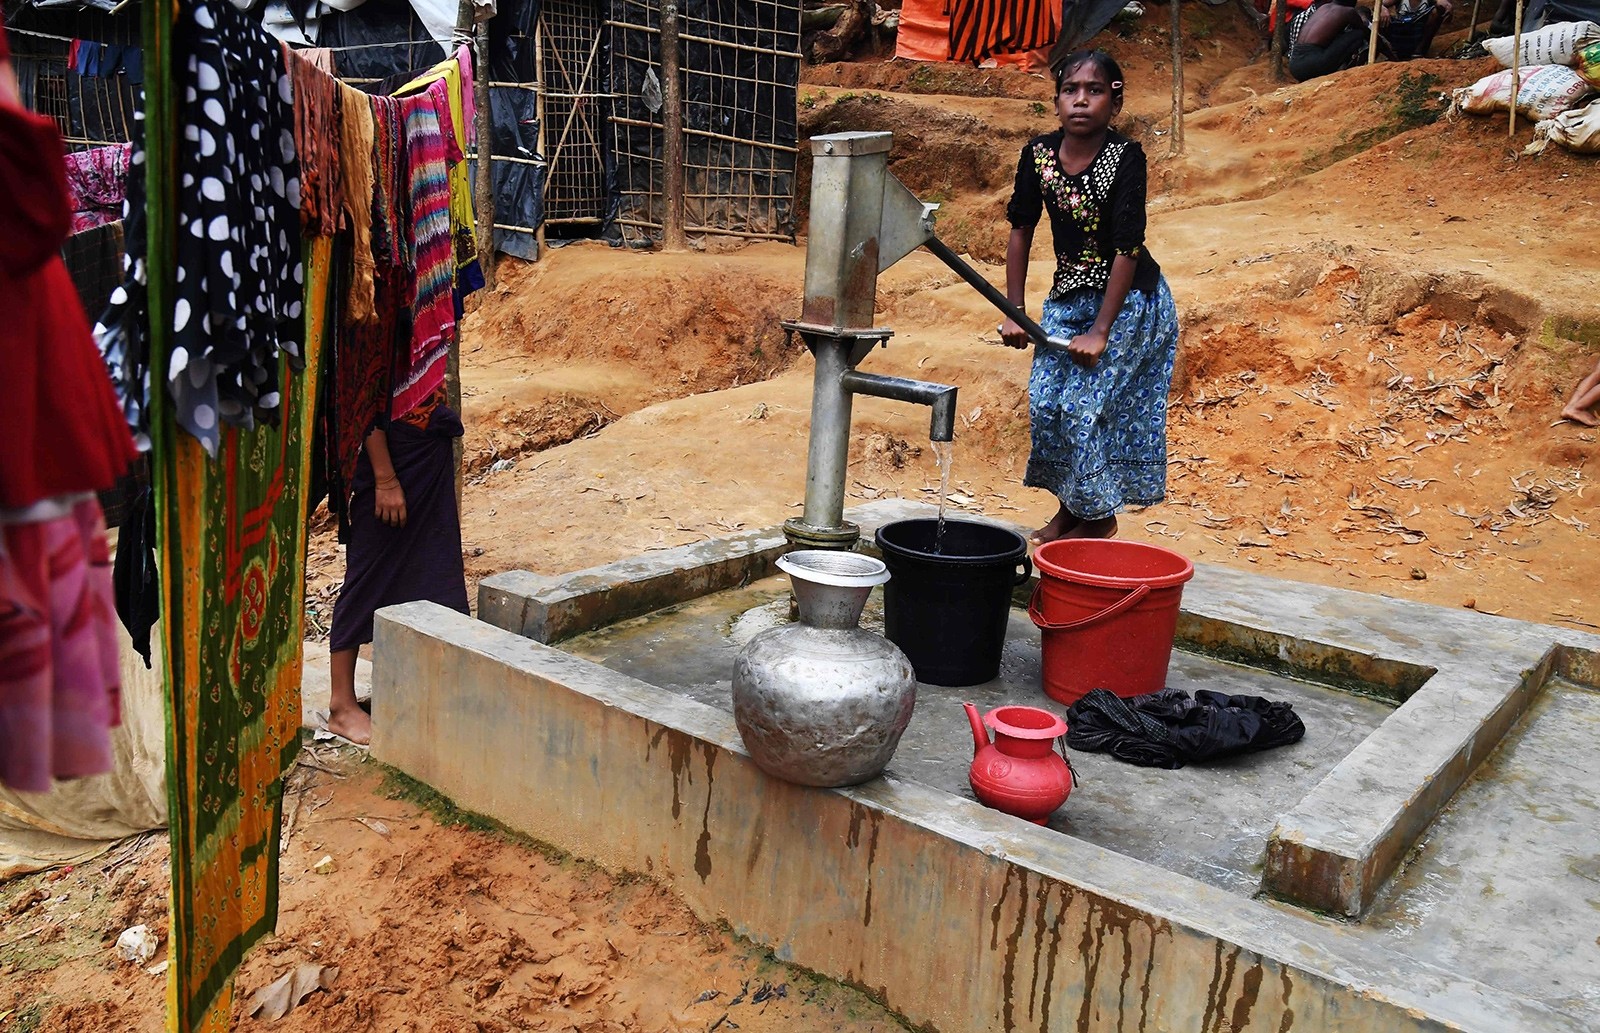 This picture taken November 4, 2017 shows ten-year-old Rohingya refugee Tahera Begum collecting water from a hand-pump at the Balukhali refugee camp in Bangladesh's Ukhia district (AFP Photo)